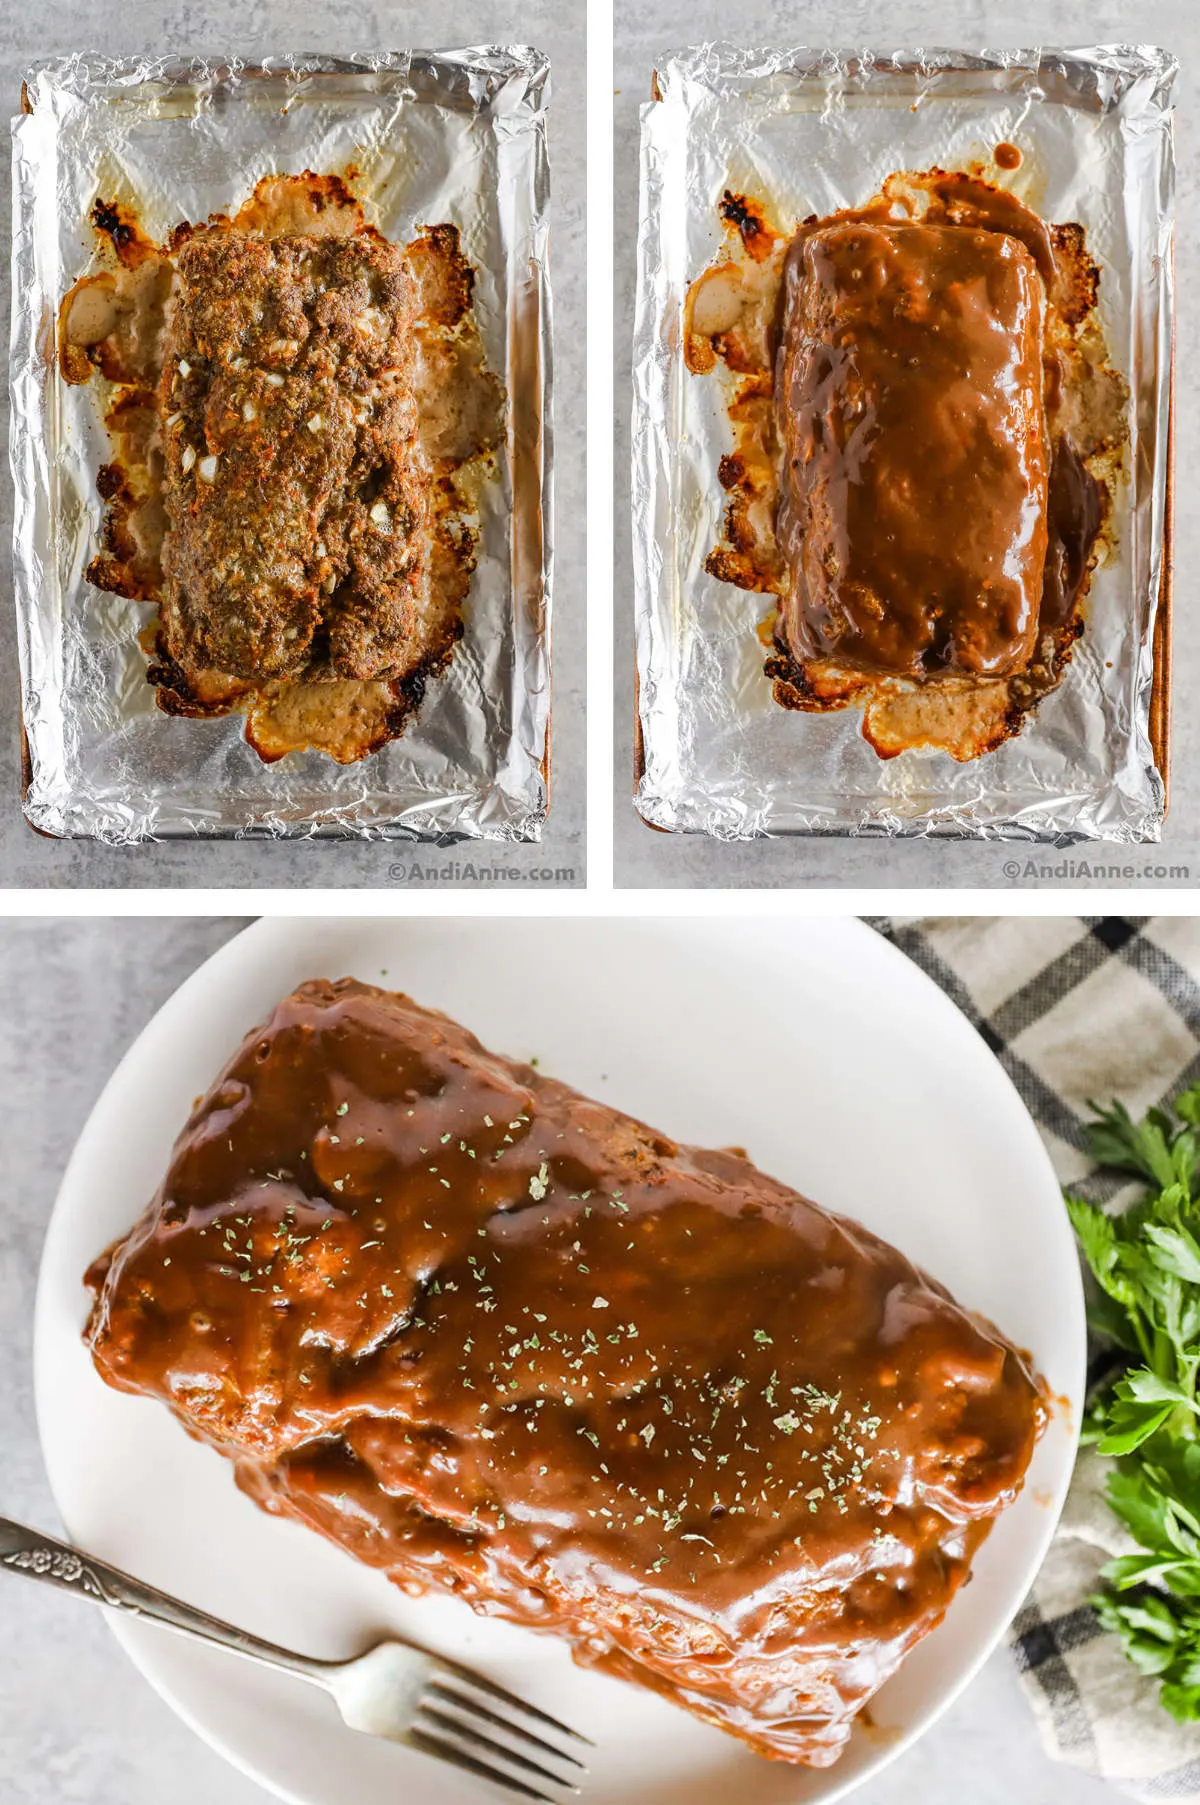 Three overhead images in one: 1. Meatloaf is out of the oven and cooked. 2. Gravy is added to meatloaf. 3. Meatloaf is transferred to a white plate with fork at the side. 